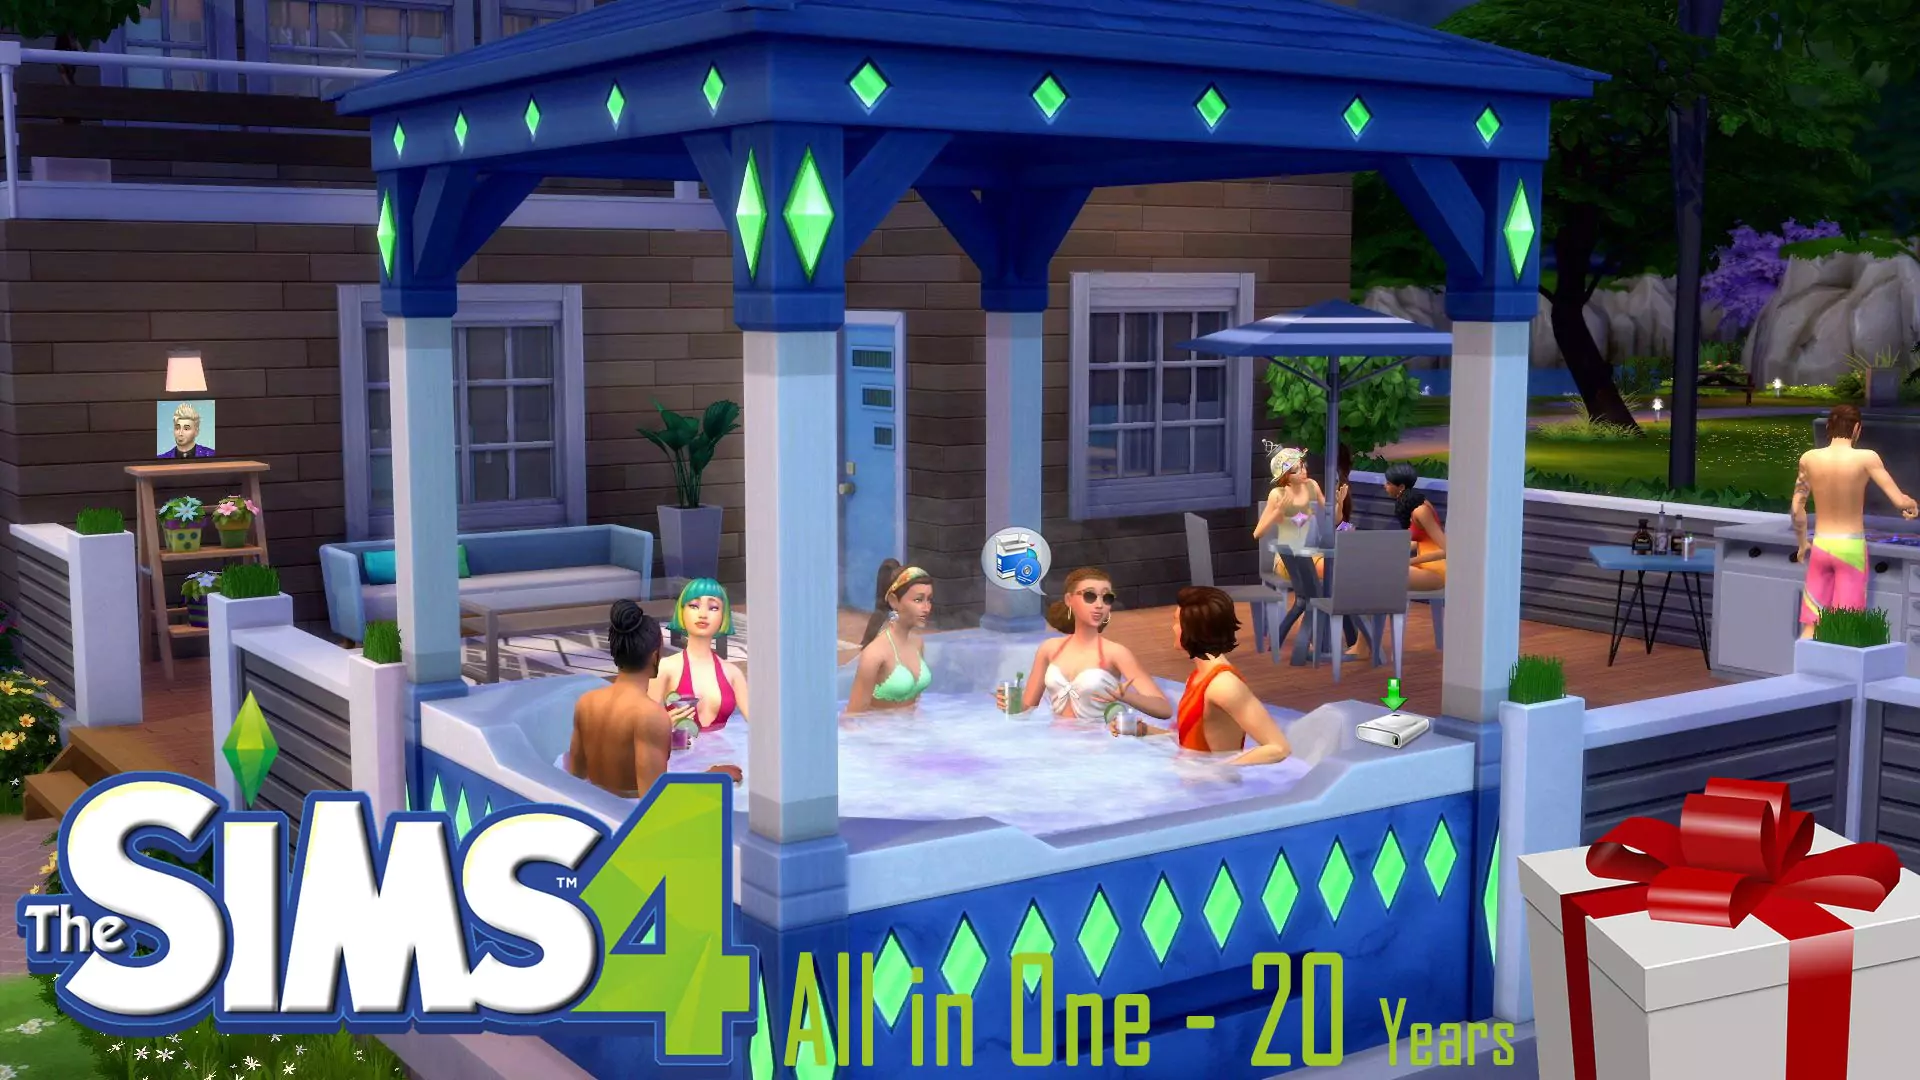 The Sims 4 All in One 20 Years